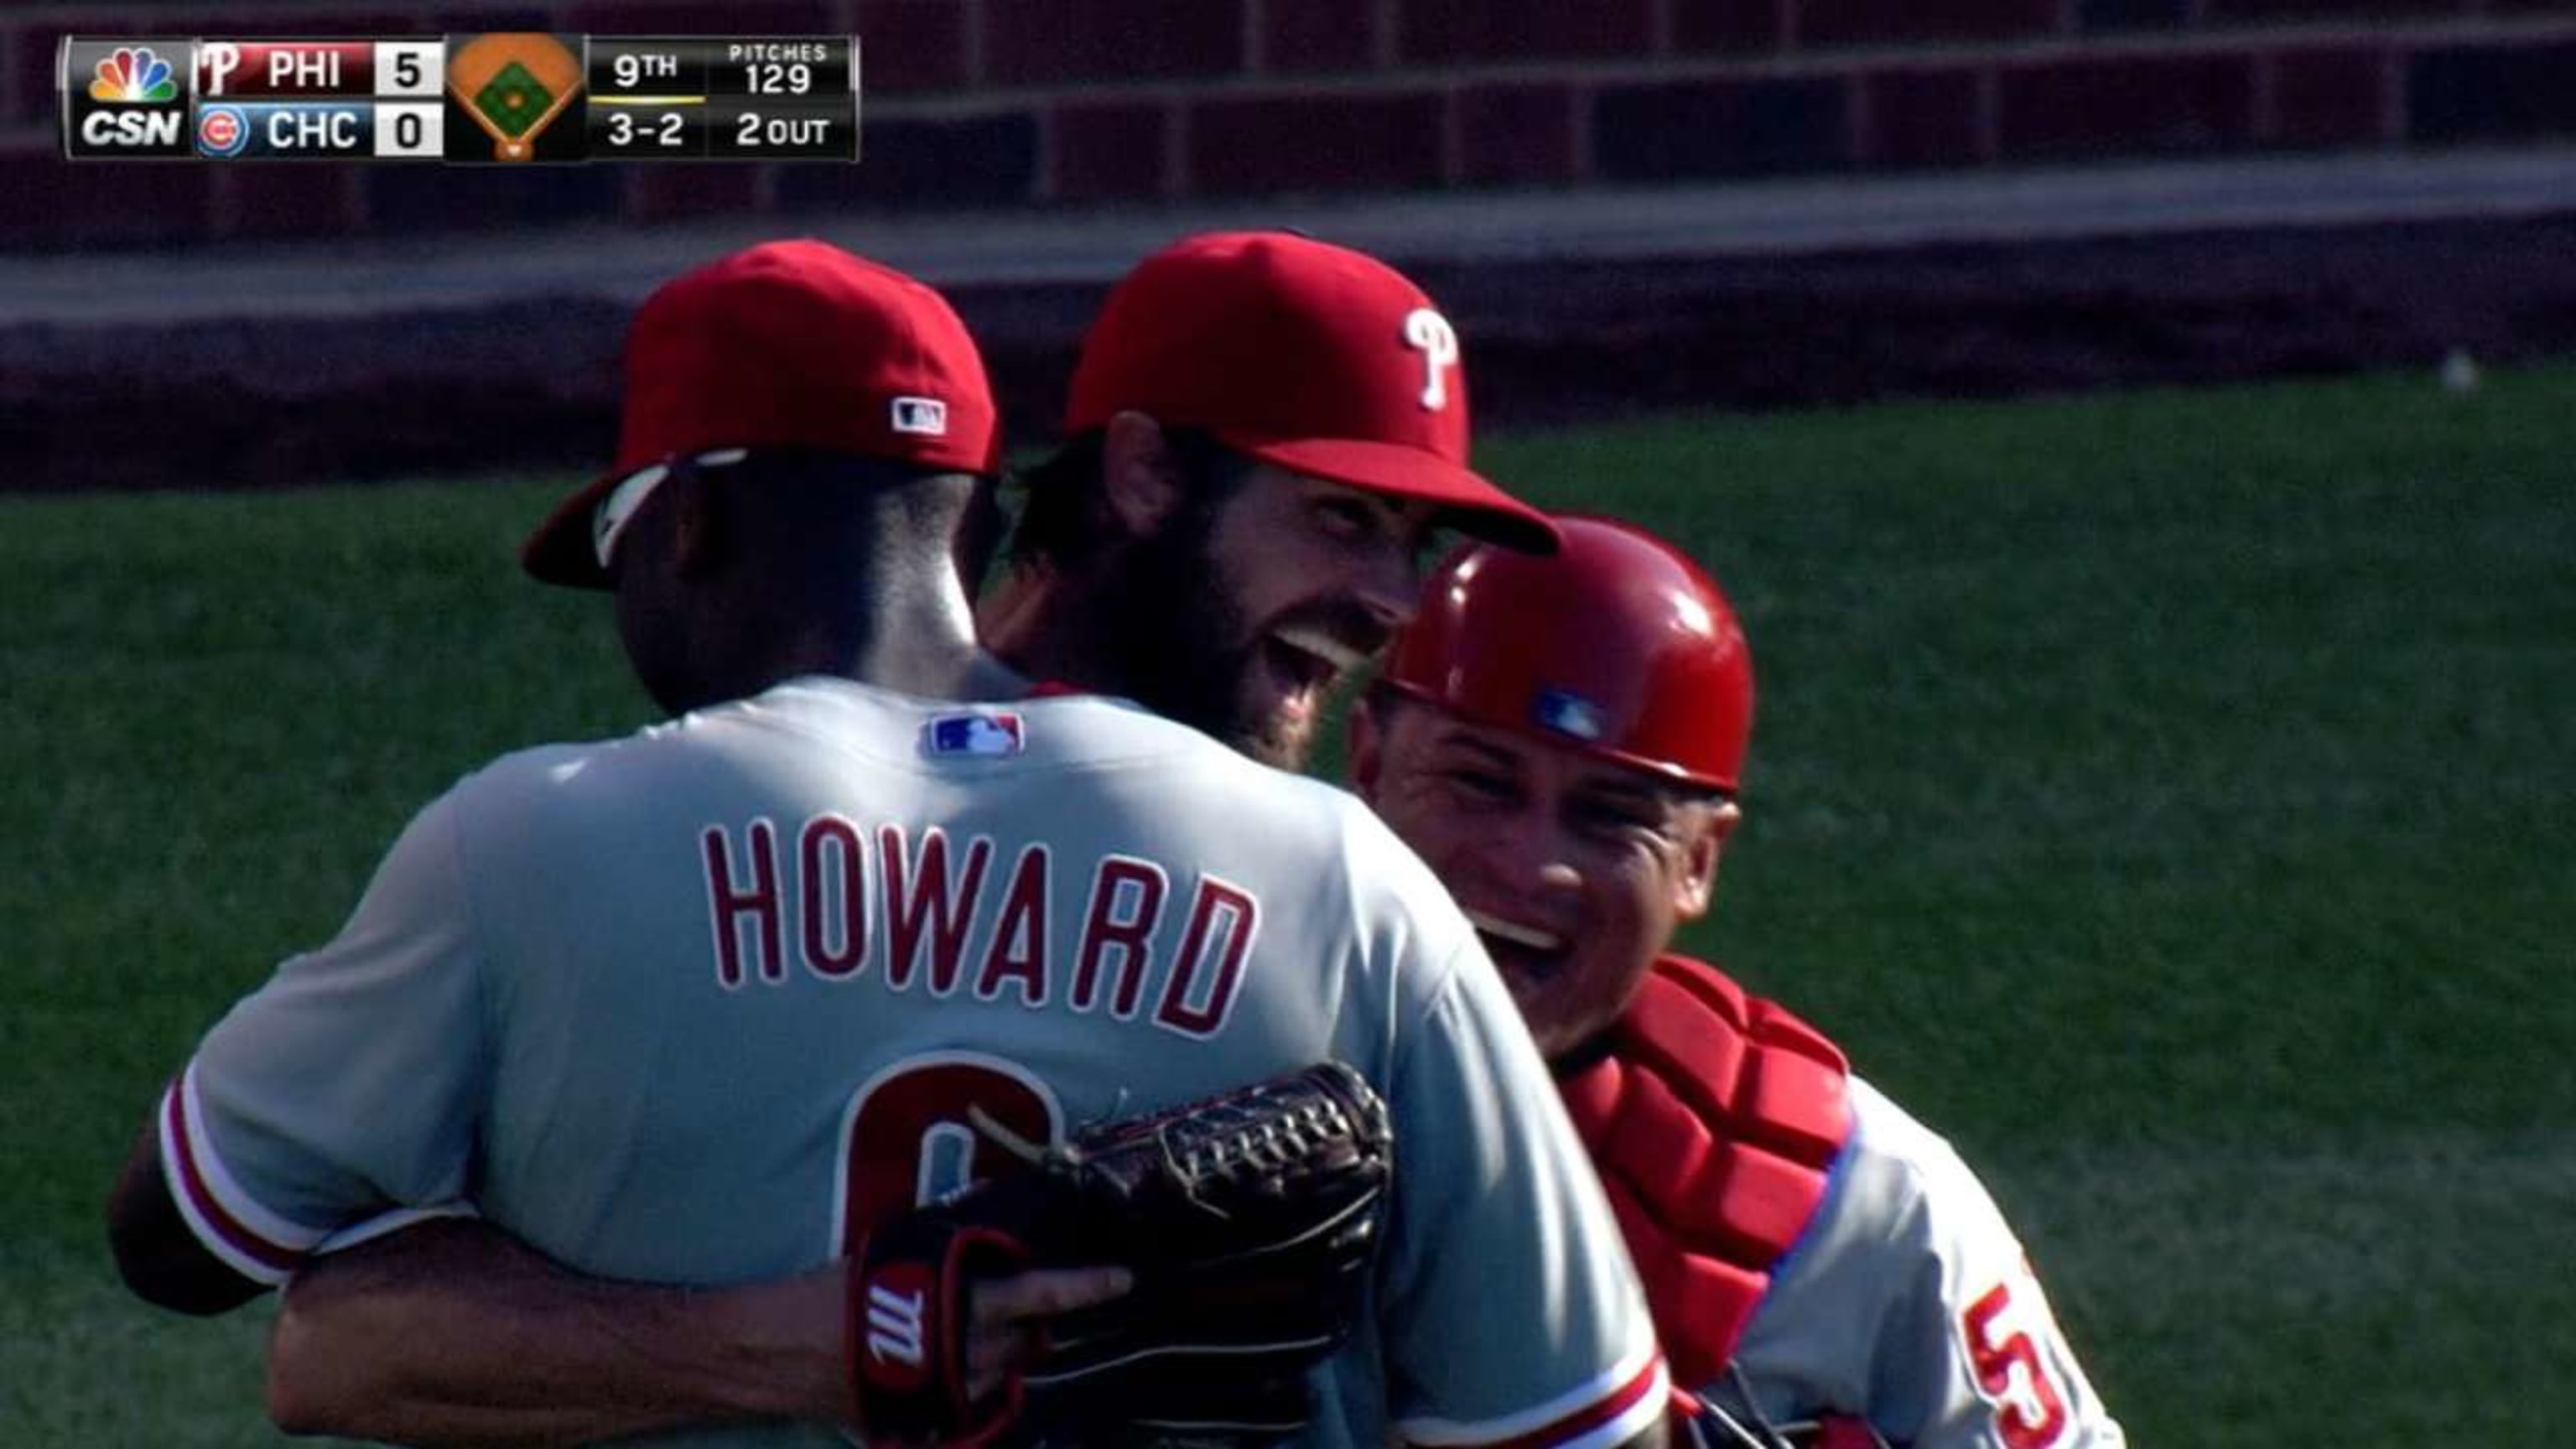 MLB: Phillies' Hamels pitches 1st no-hitter vs Cubs in 50 years